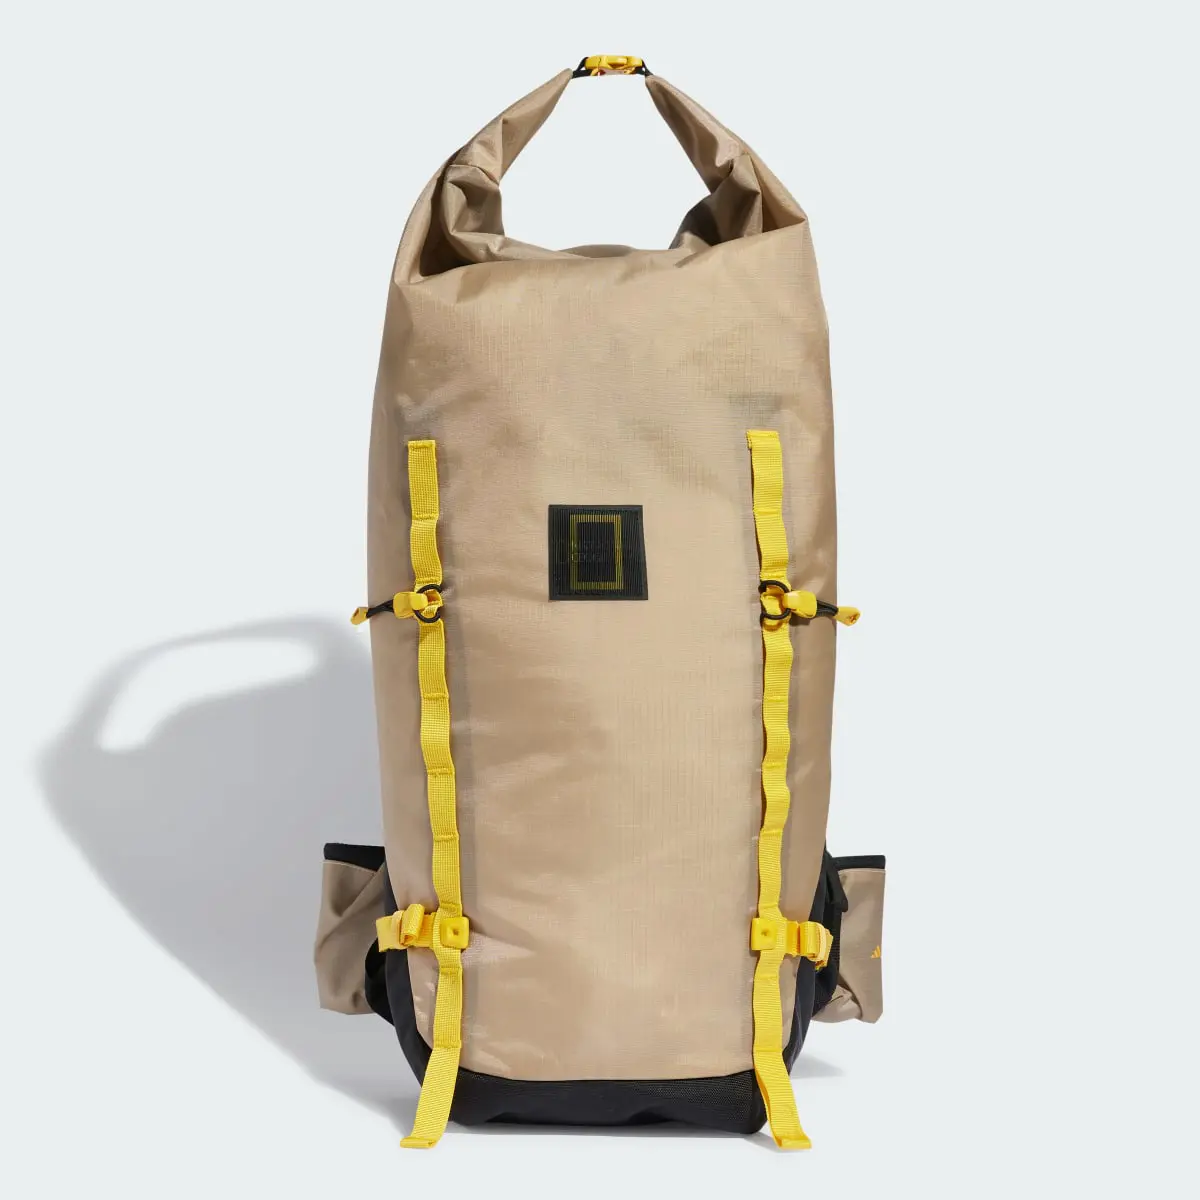 Adidas Terrex x National Geographic Hike Backpack. 1